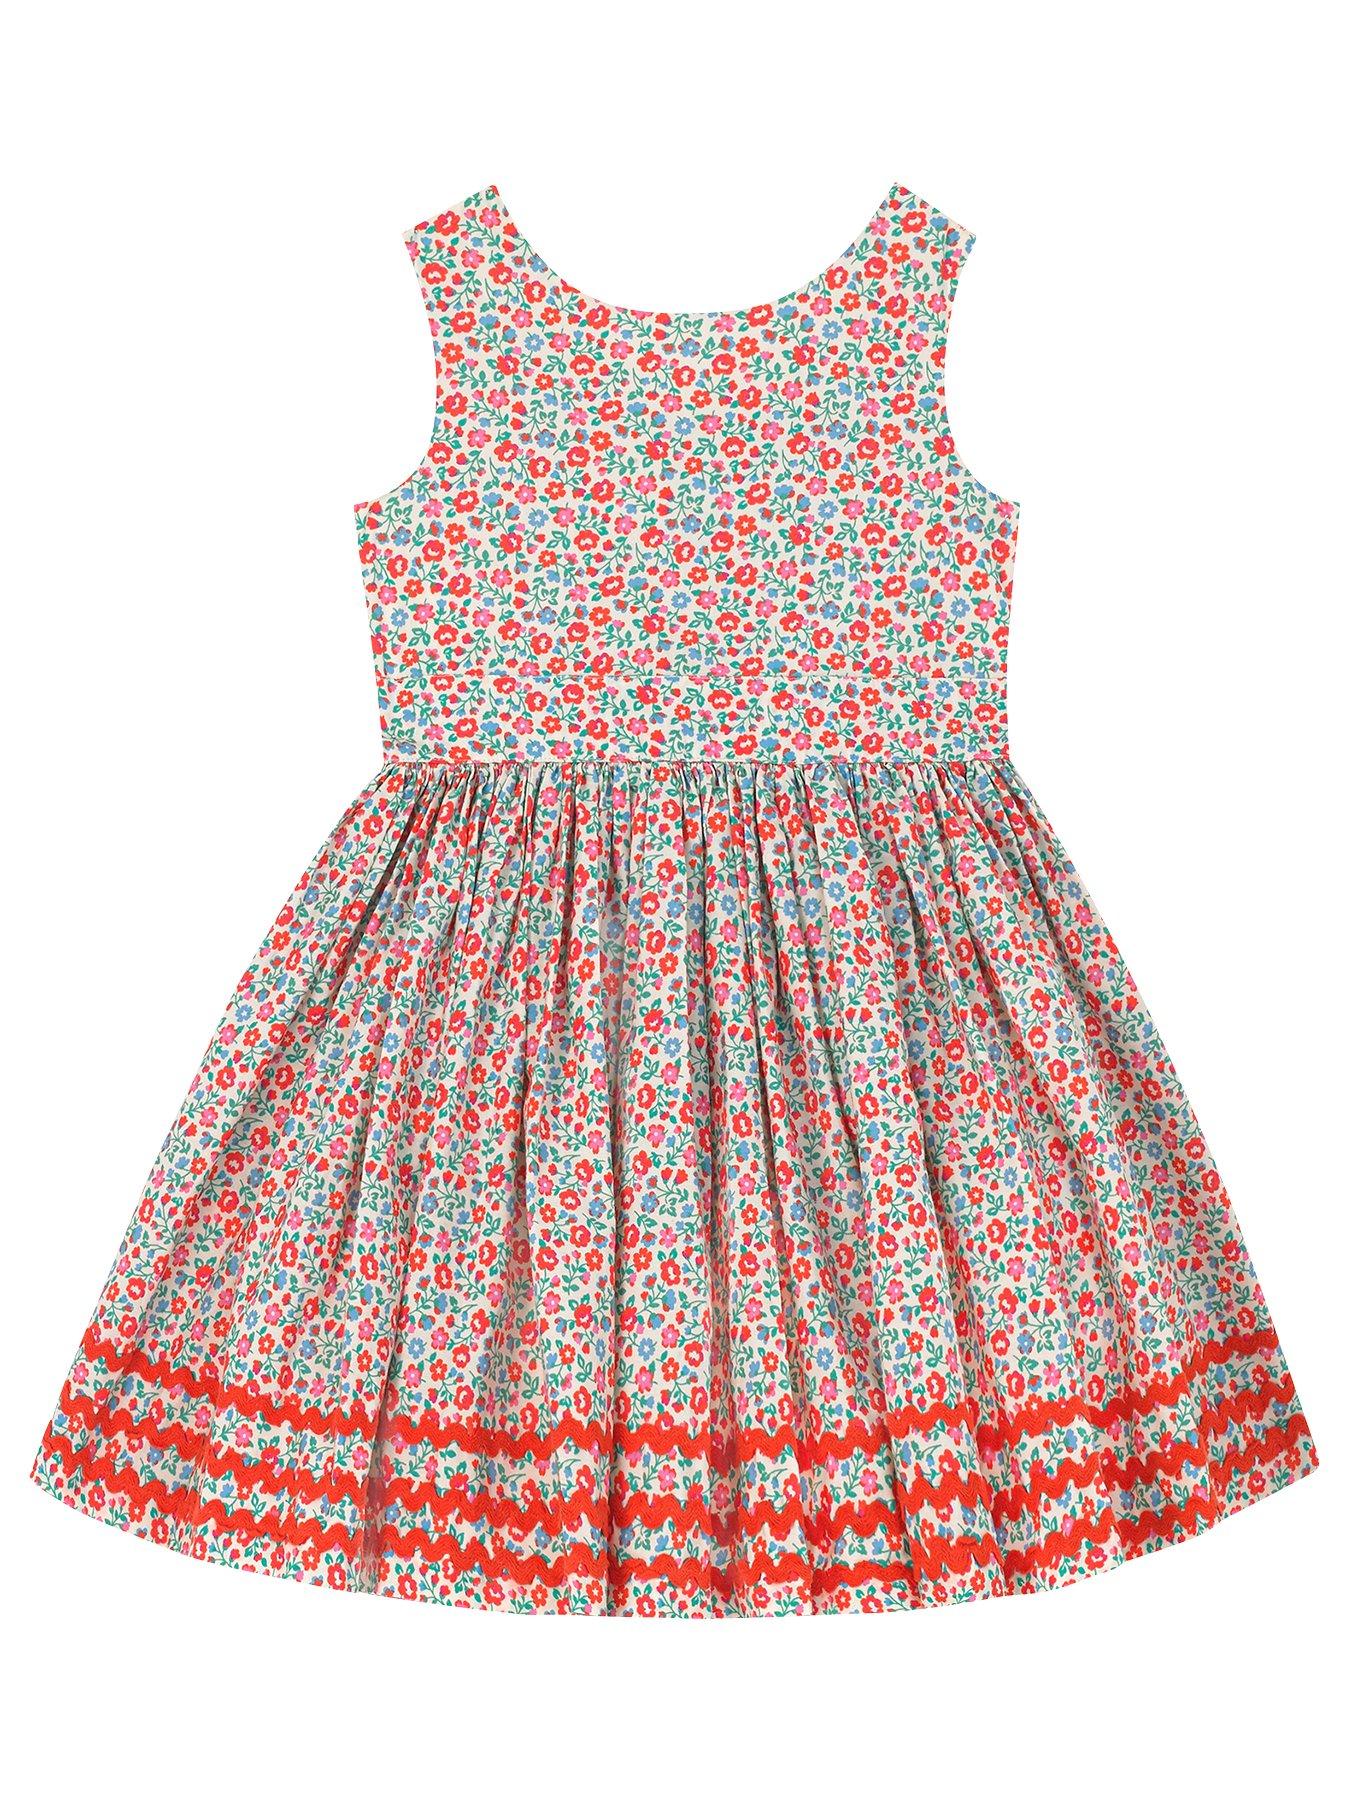 cath kidston childrens clothes